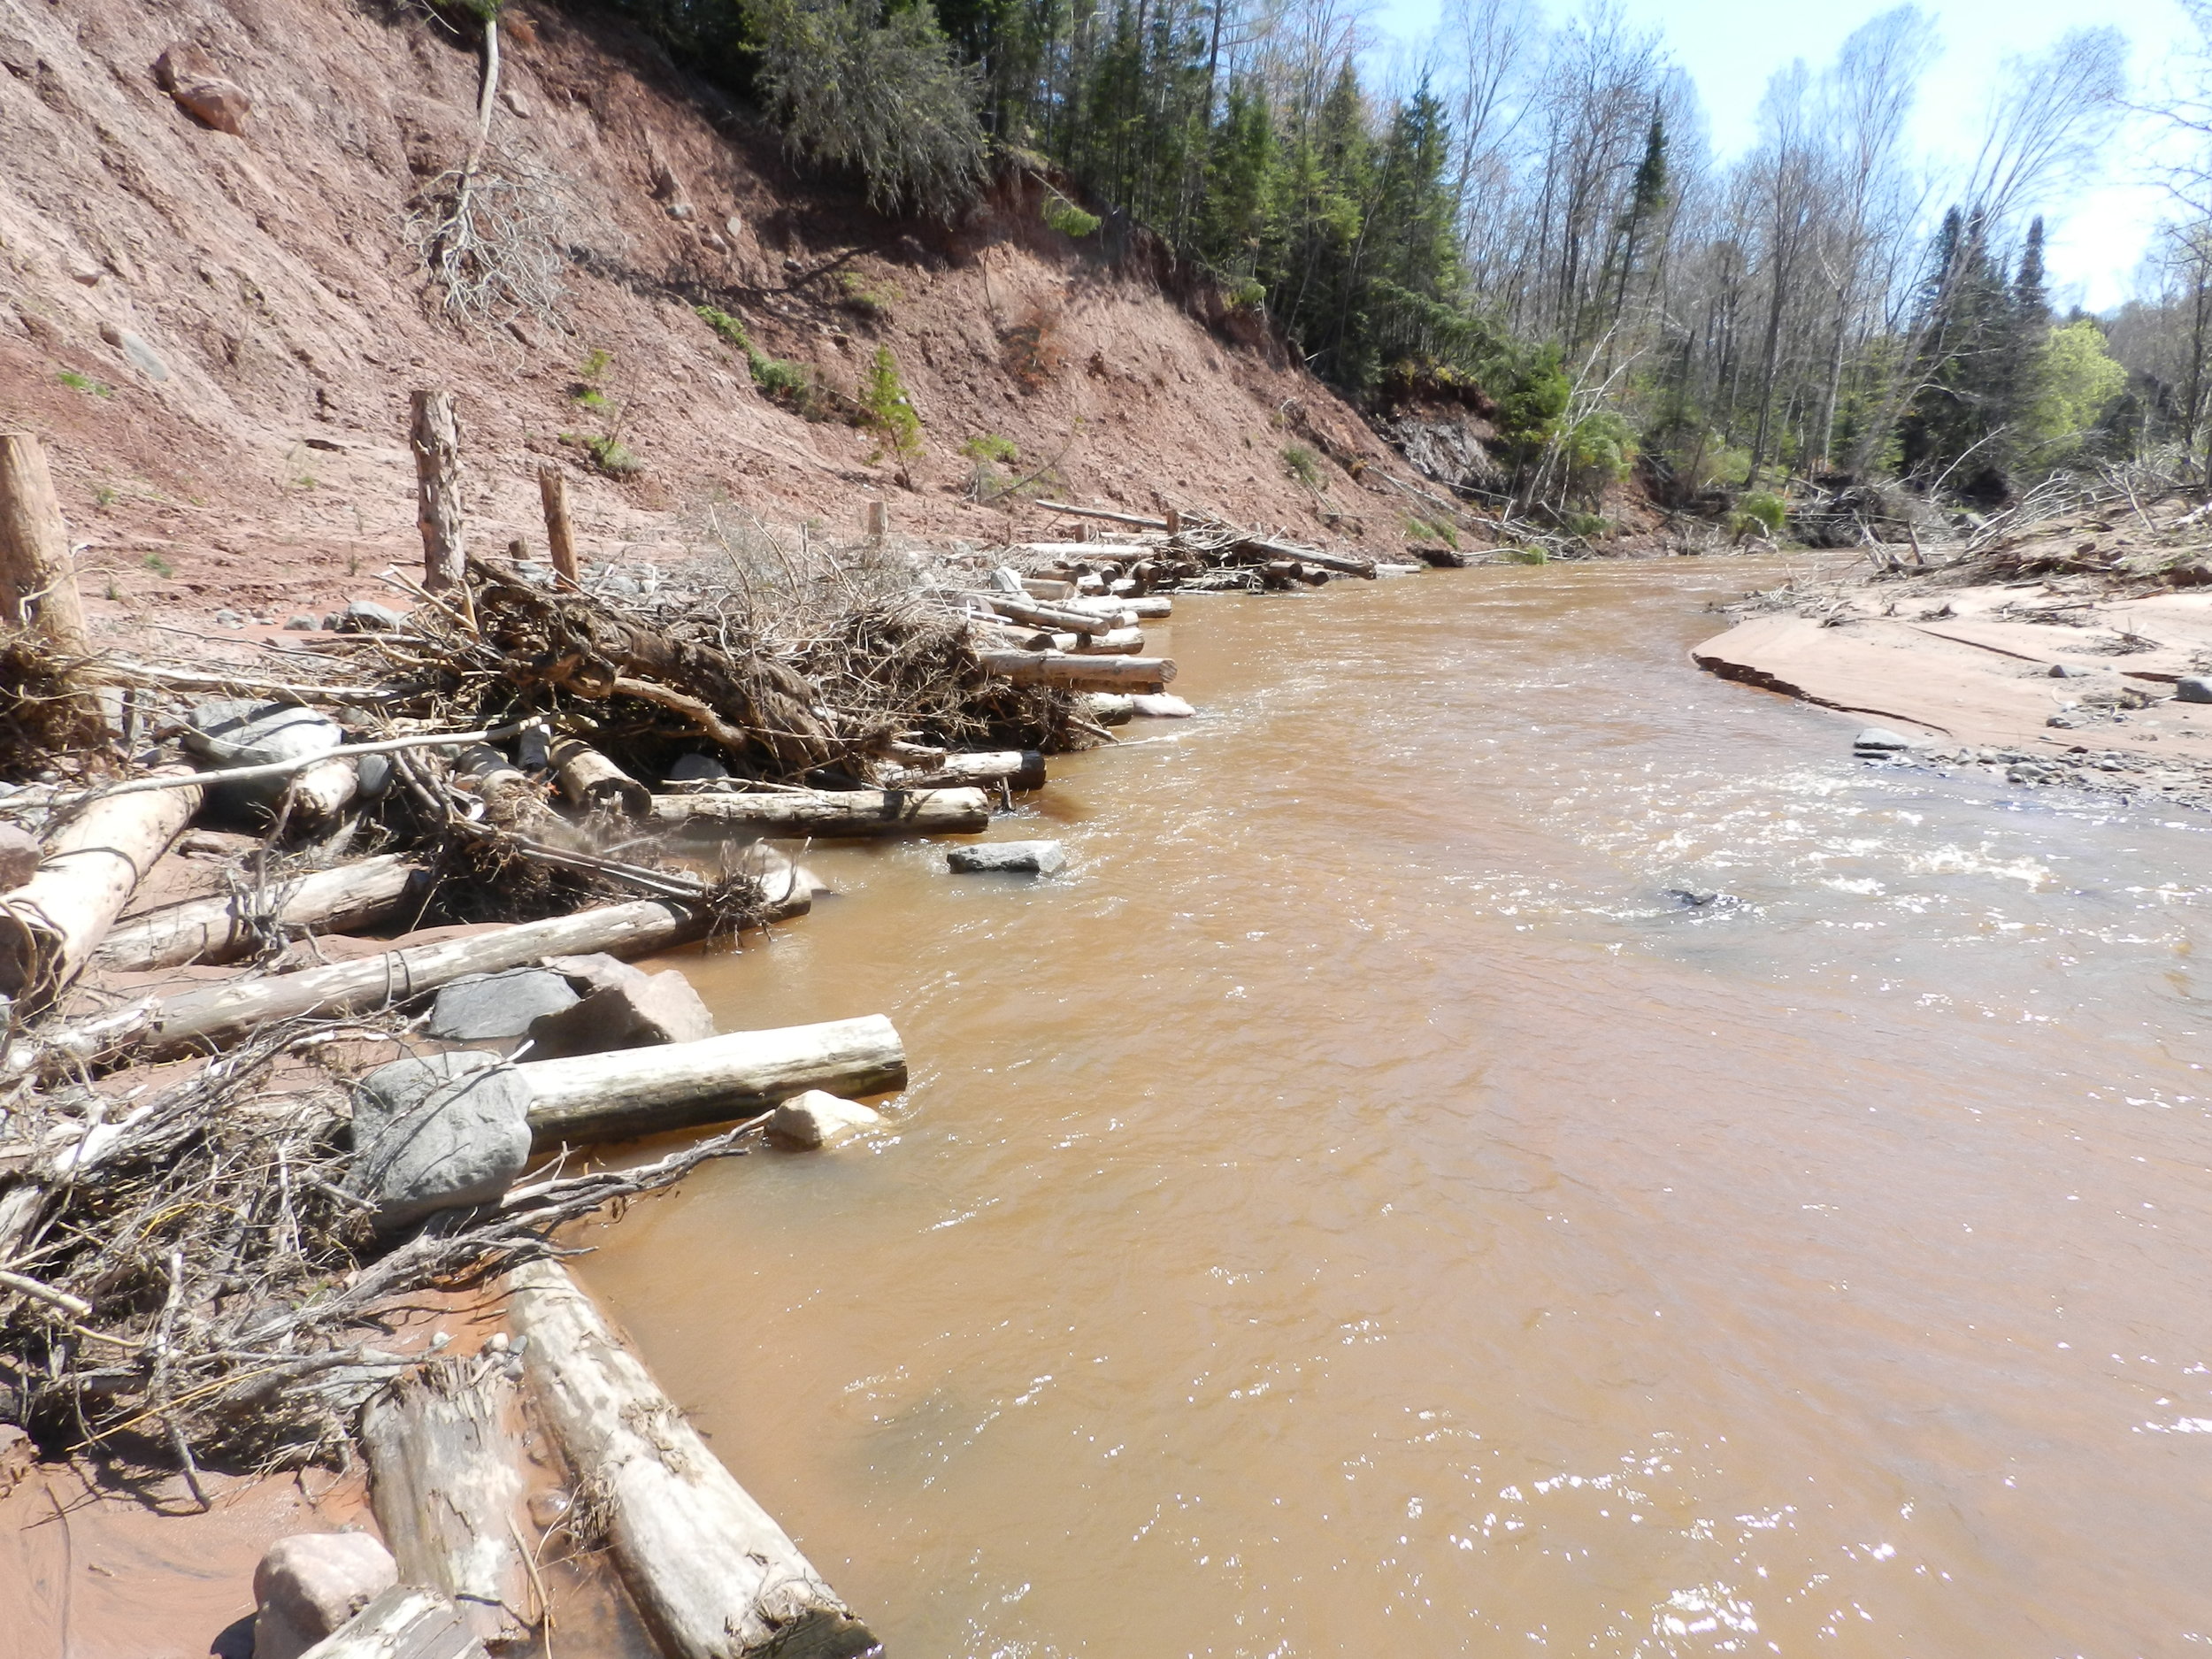 In some locations, log jams can be designed to mimic natural processes that lead to bluff toe stability